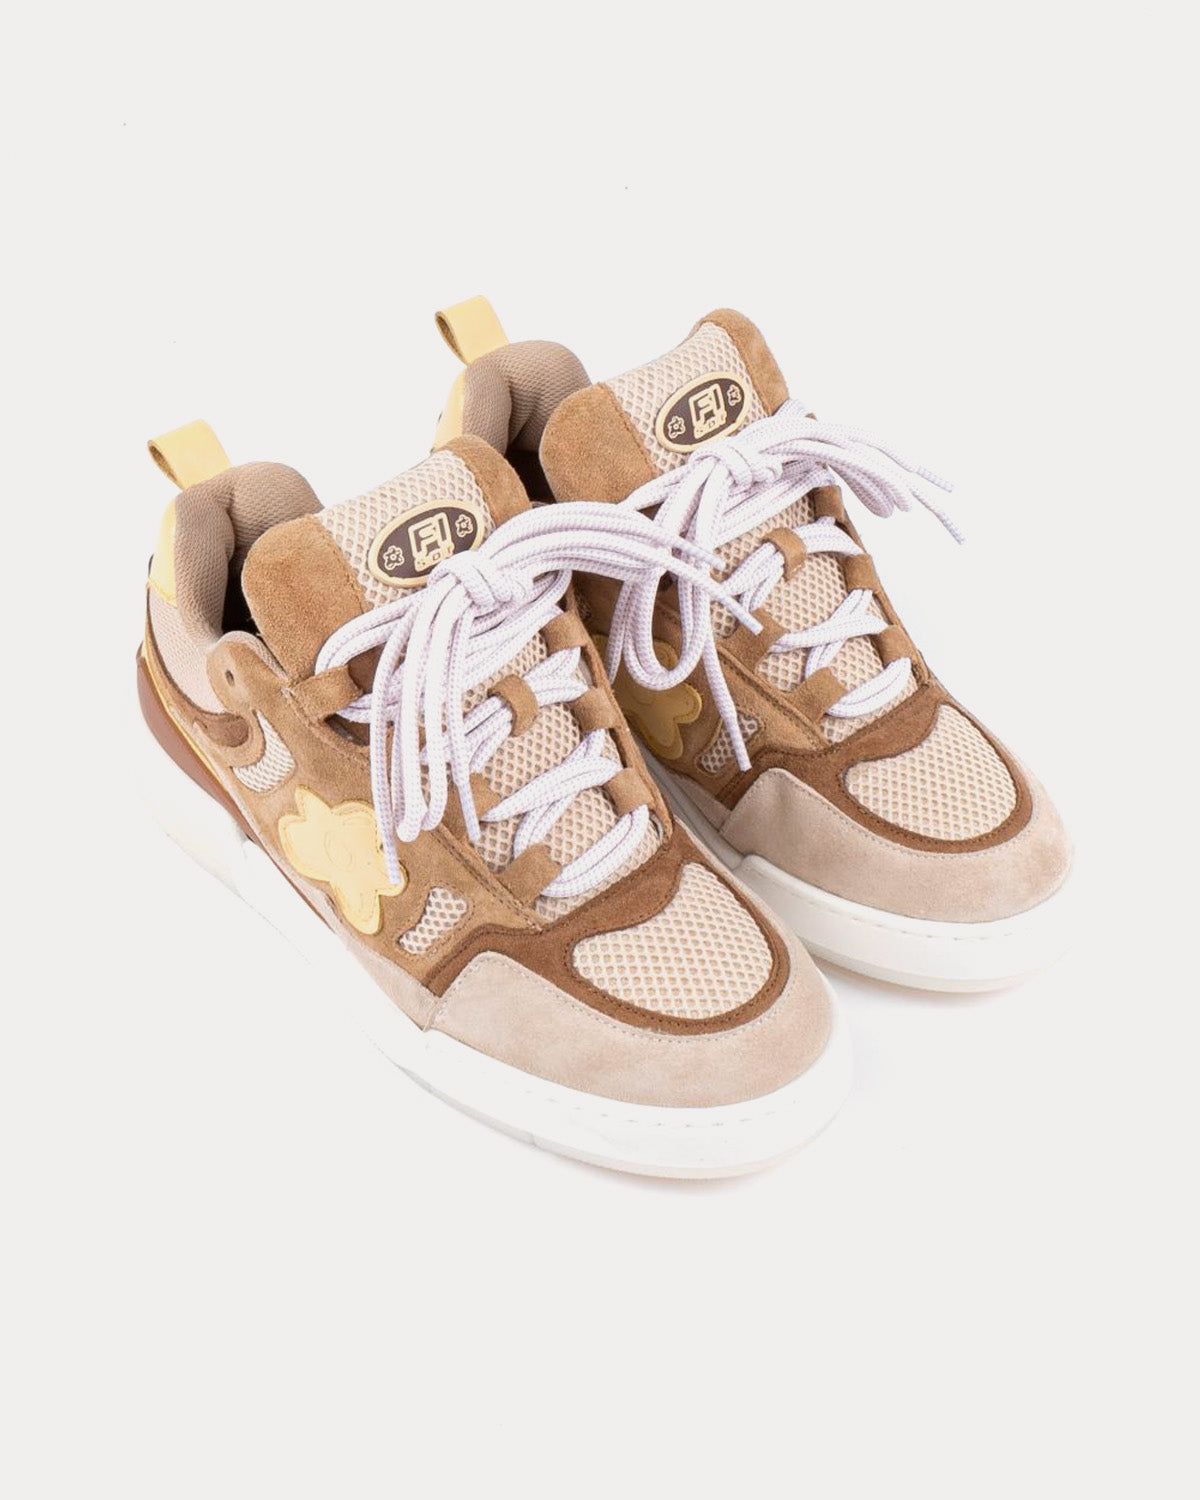 Flower Instincts x Sneakmart - Mad Hunny Beige / White Low Top Sneakers